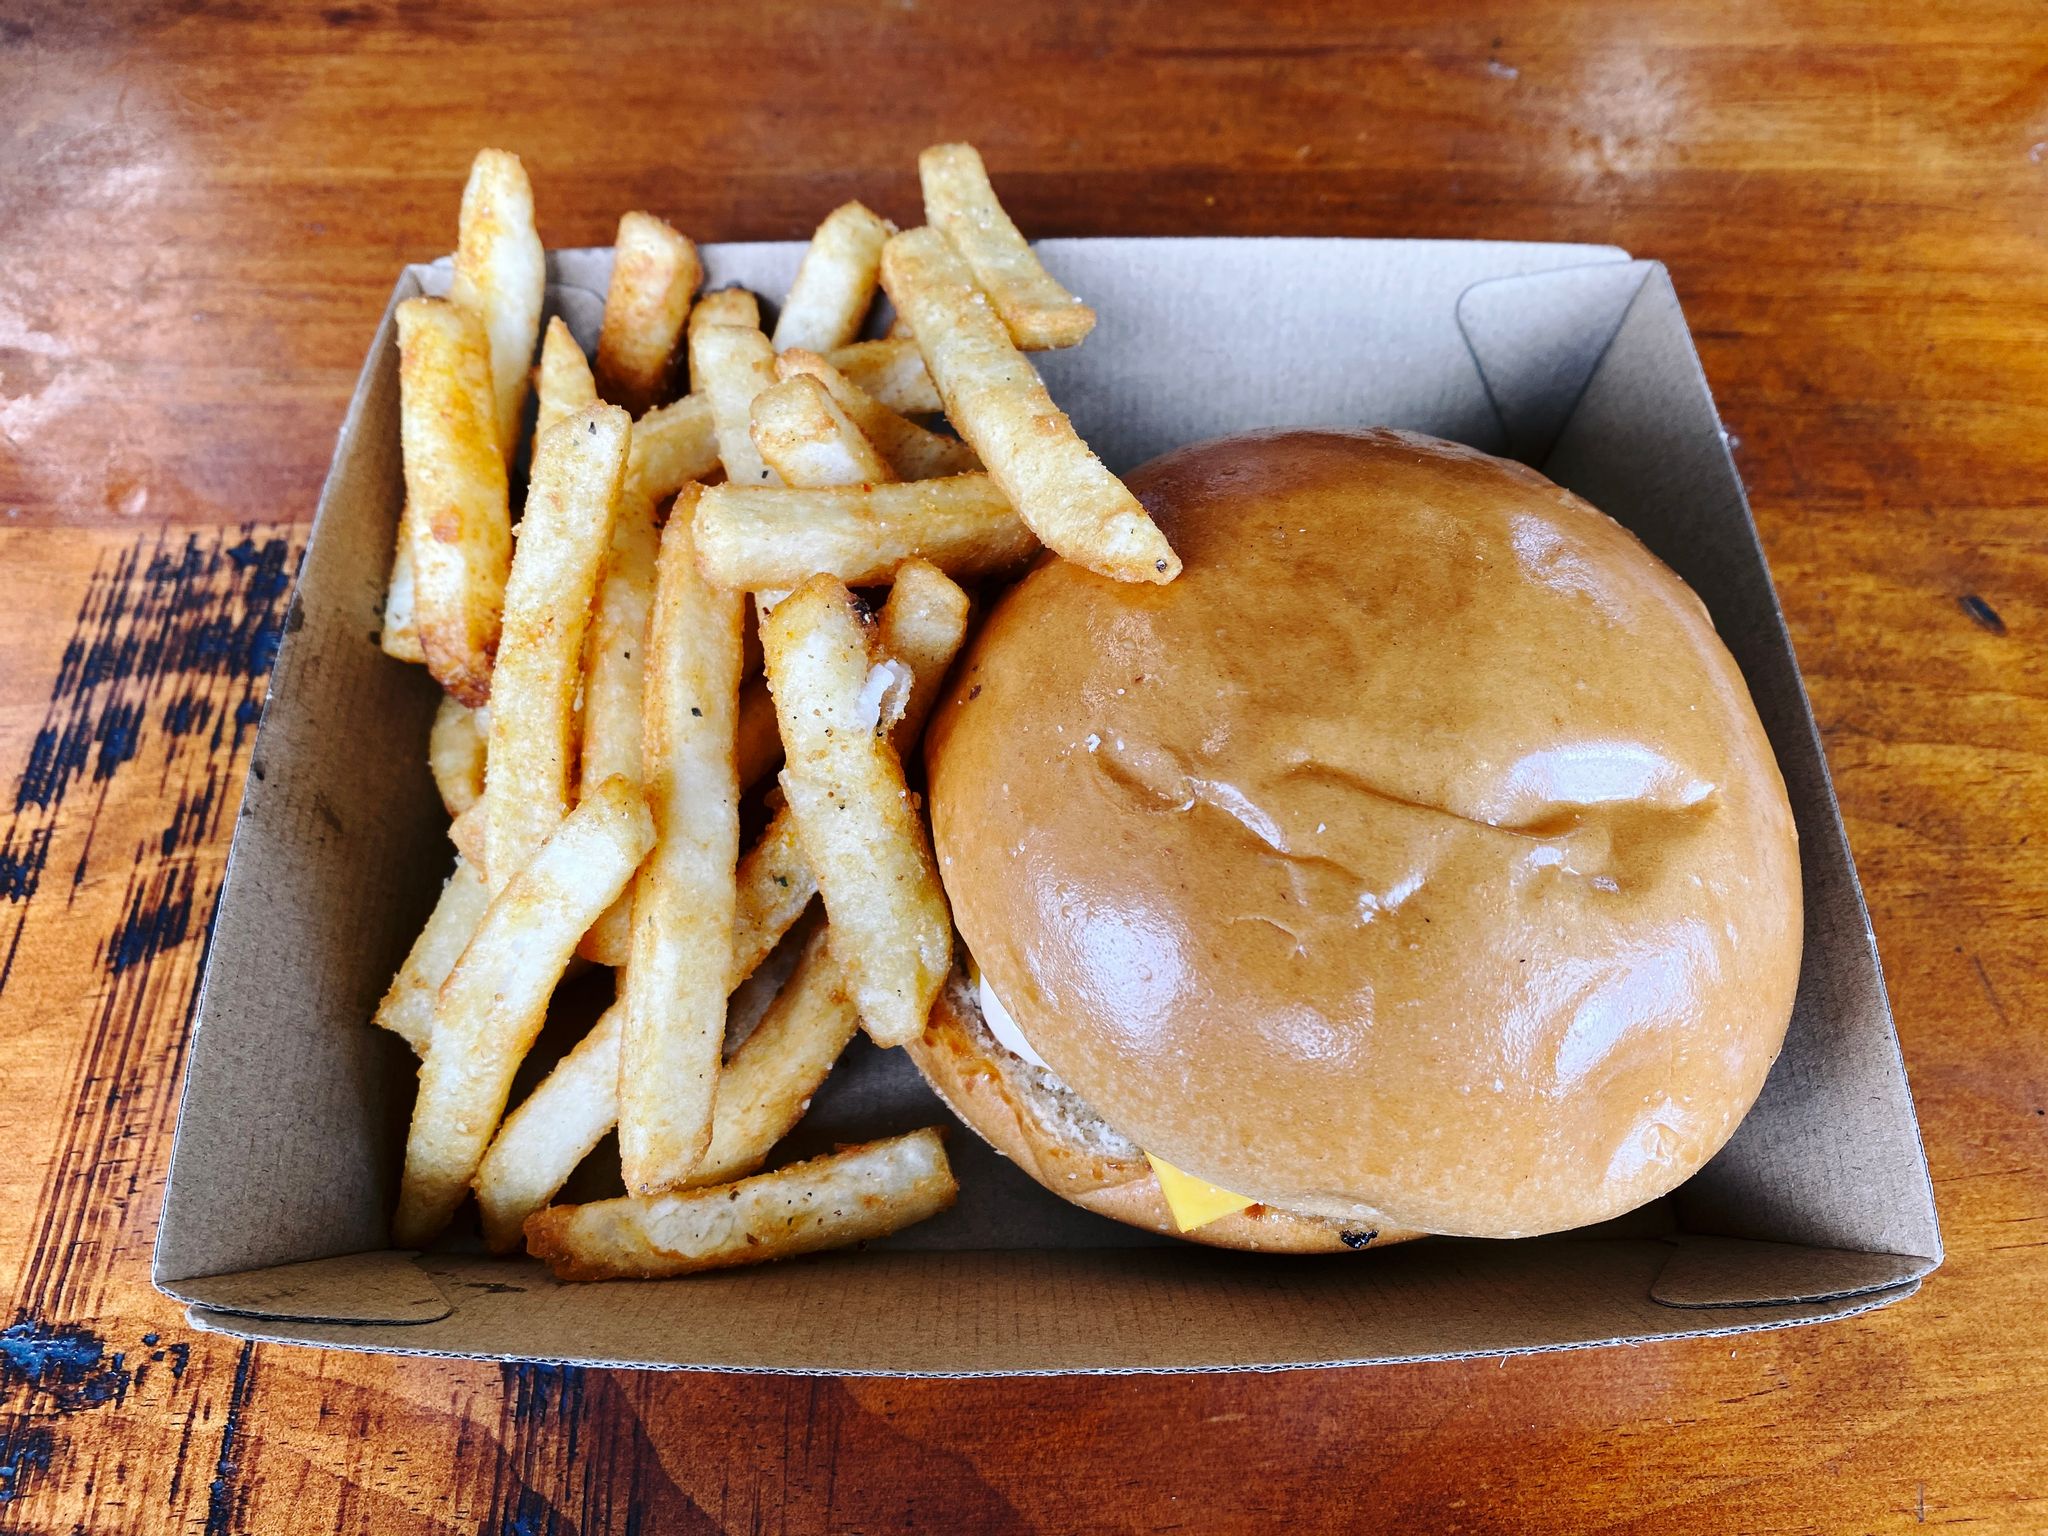 A photo of a burger and chips in a brown cardboard box.